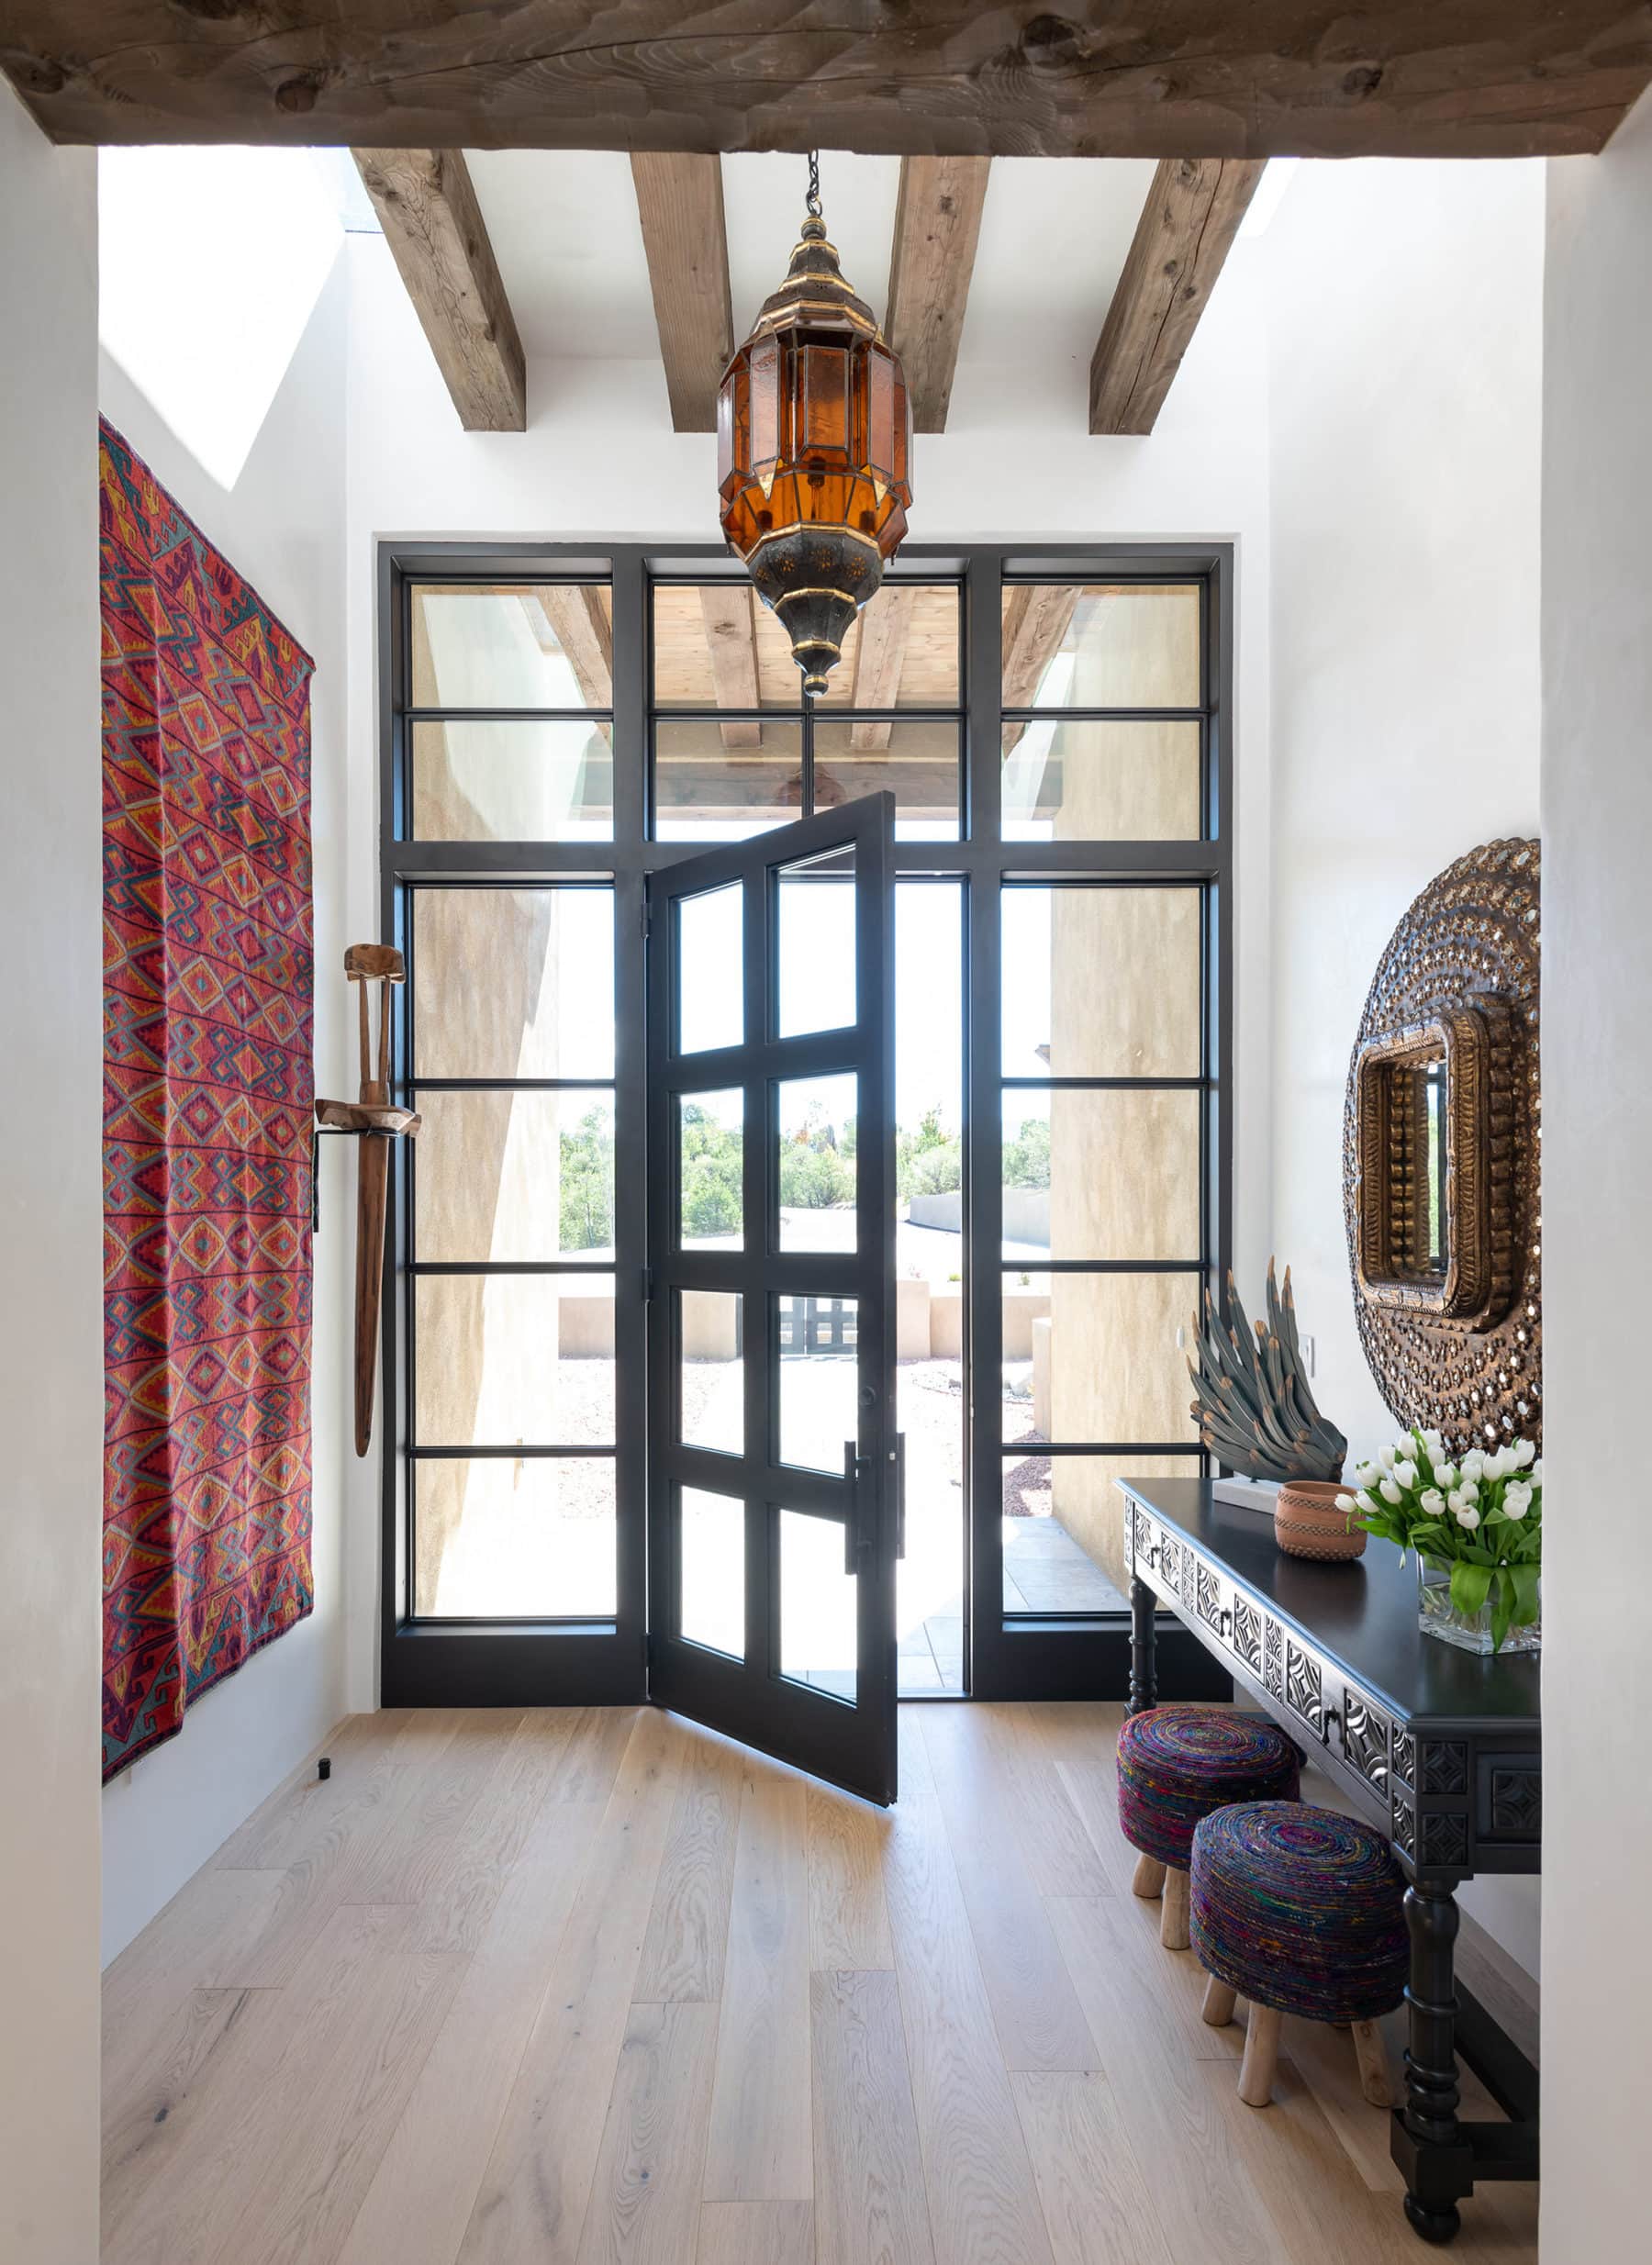 A view from front door of a southwestern inspired home in Santa Fe.